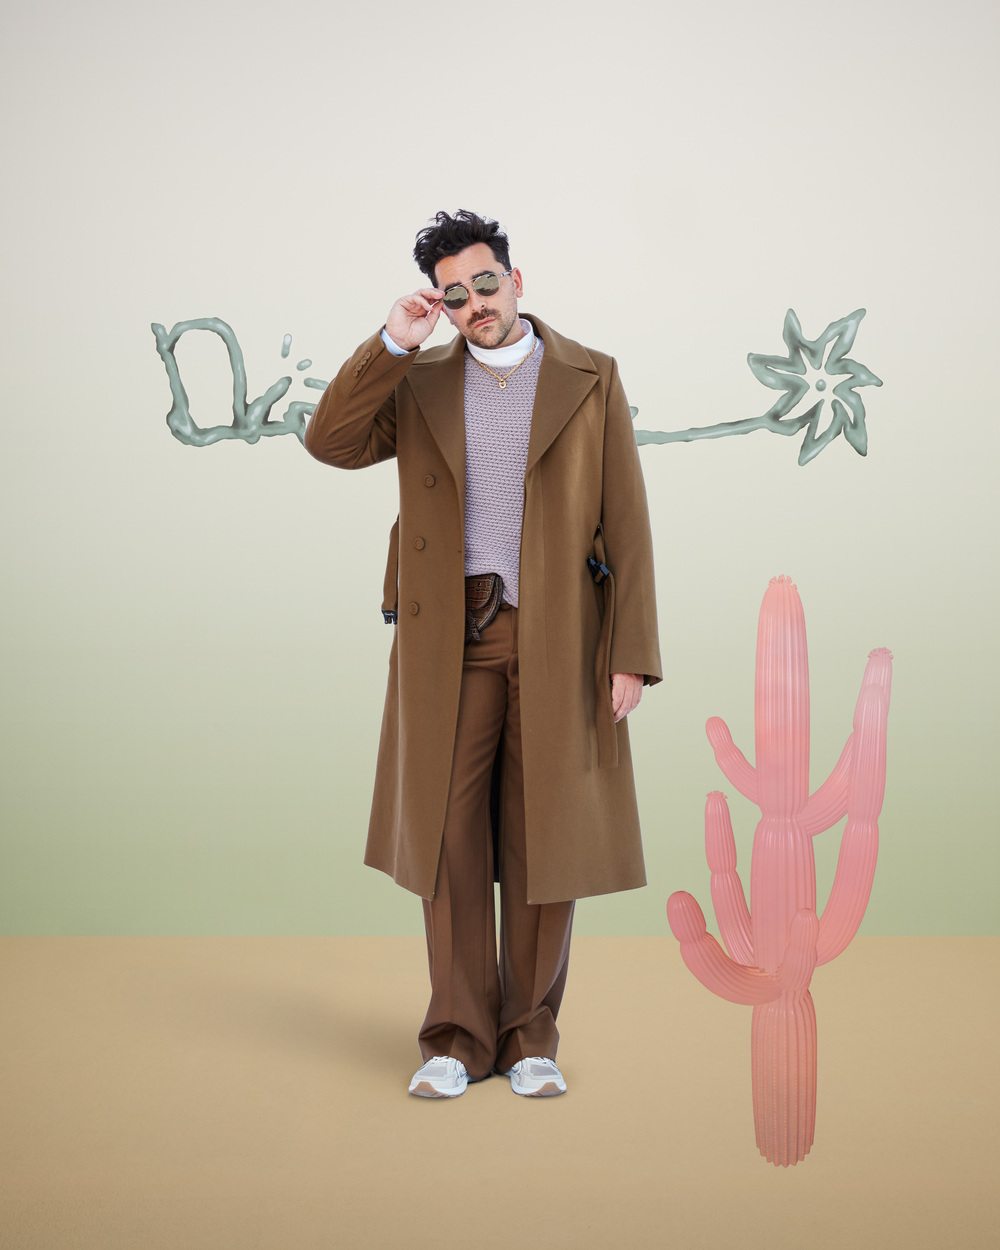 Dan Levy wearing the Cactus Jack Dior collection 